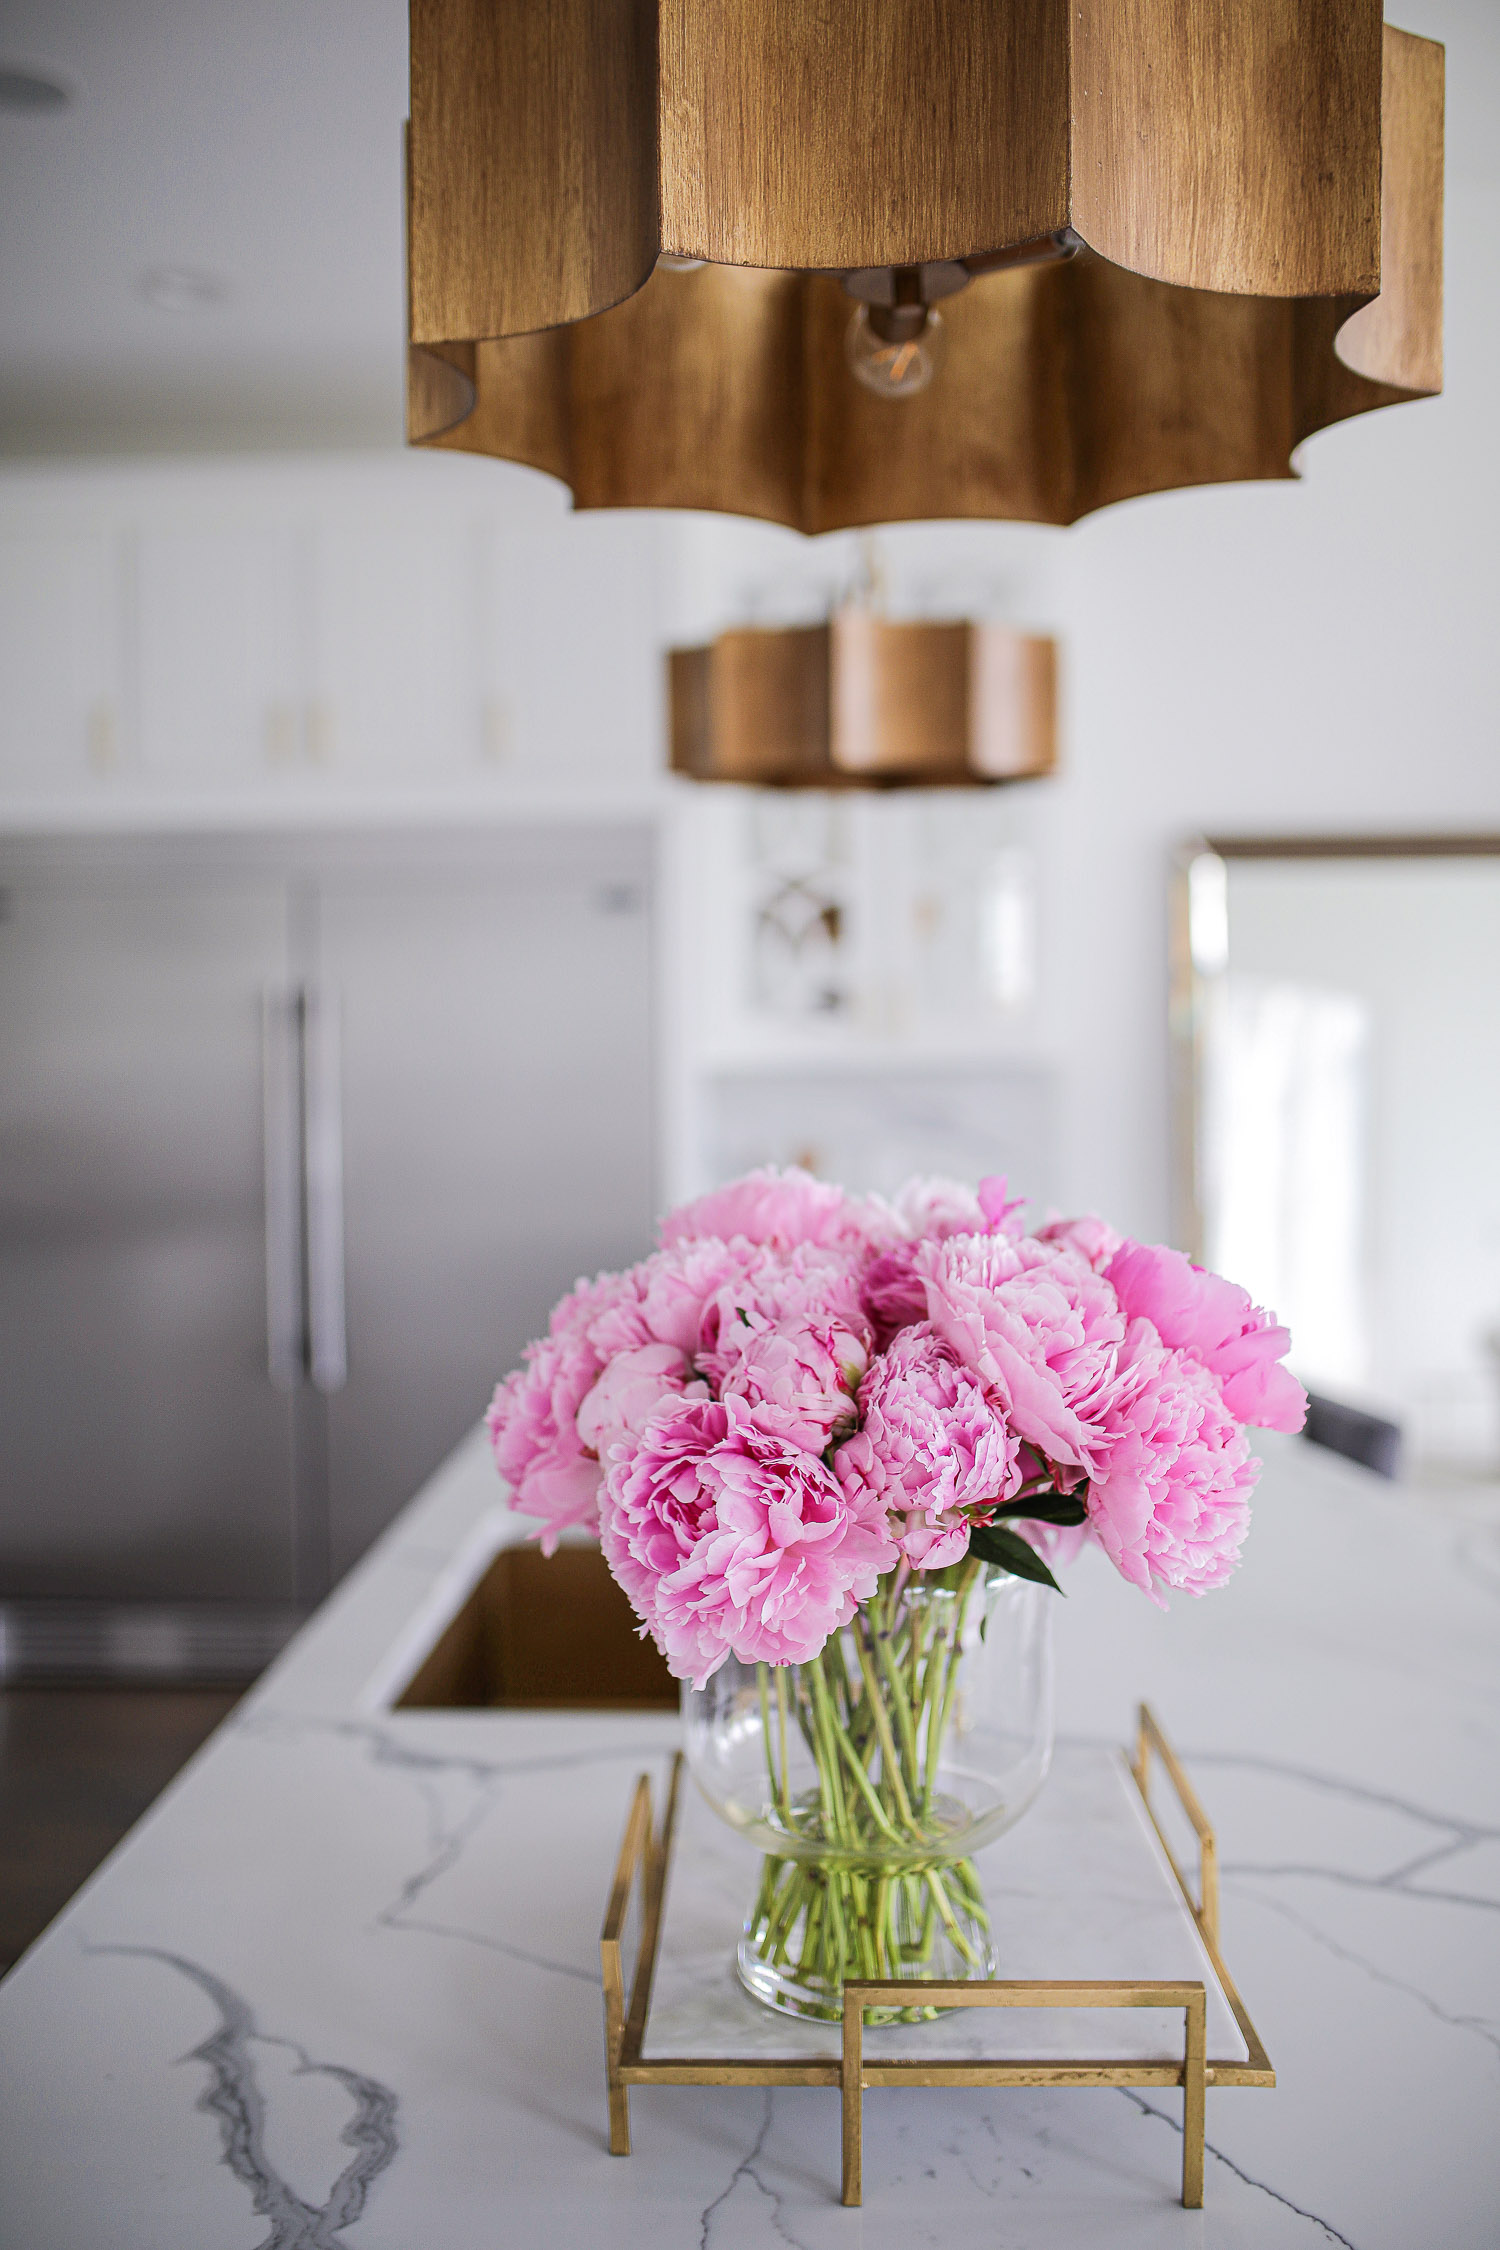 Pinterest white kitchen quartz, ilv majestic stove, Emily Gemma kitchen, gold kitchen sink, Emily Gemma kitchen, grey and gold barstools | Spring Kitchen by popular US life and style blog: image of a kitchen with white cabinets, wood flooring, wooden light pendants, marble counter tops, gold and marble tray with a  vase of pink peonies. 